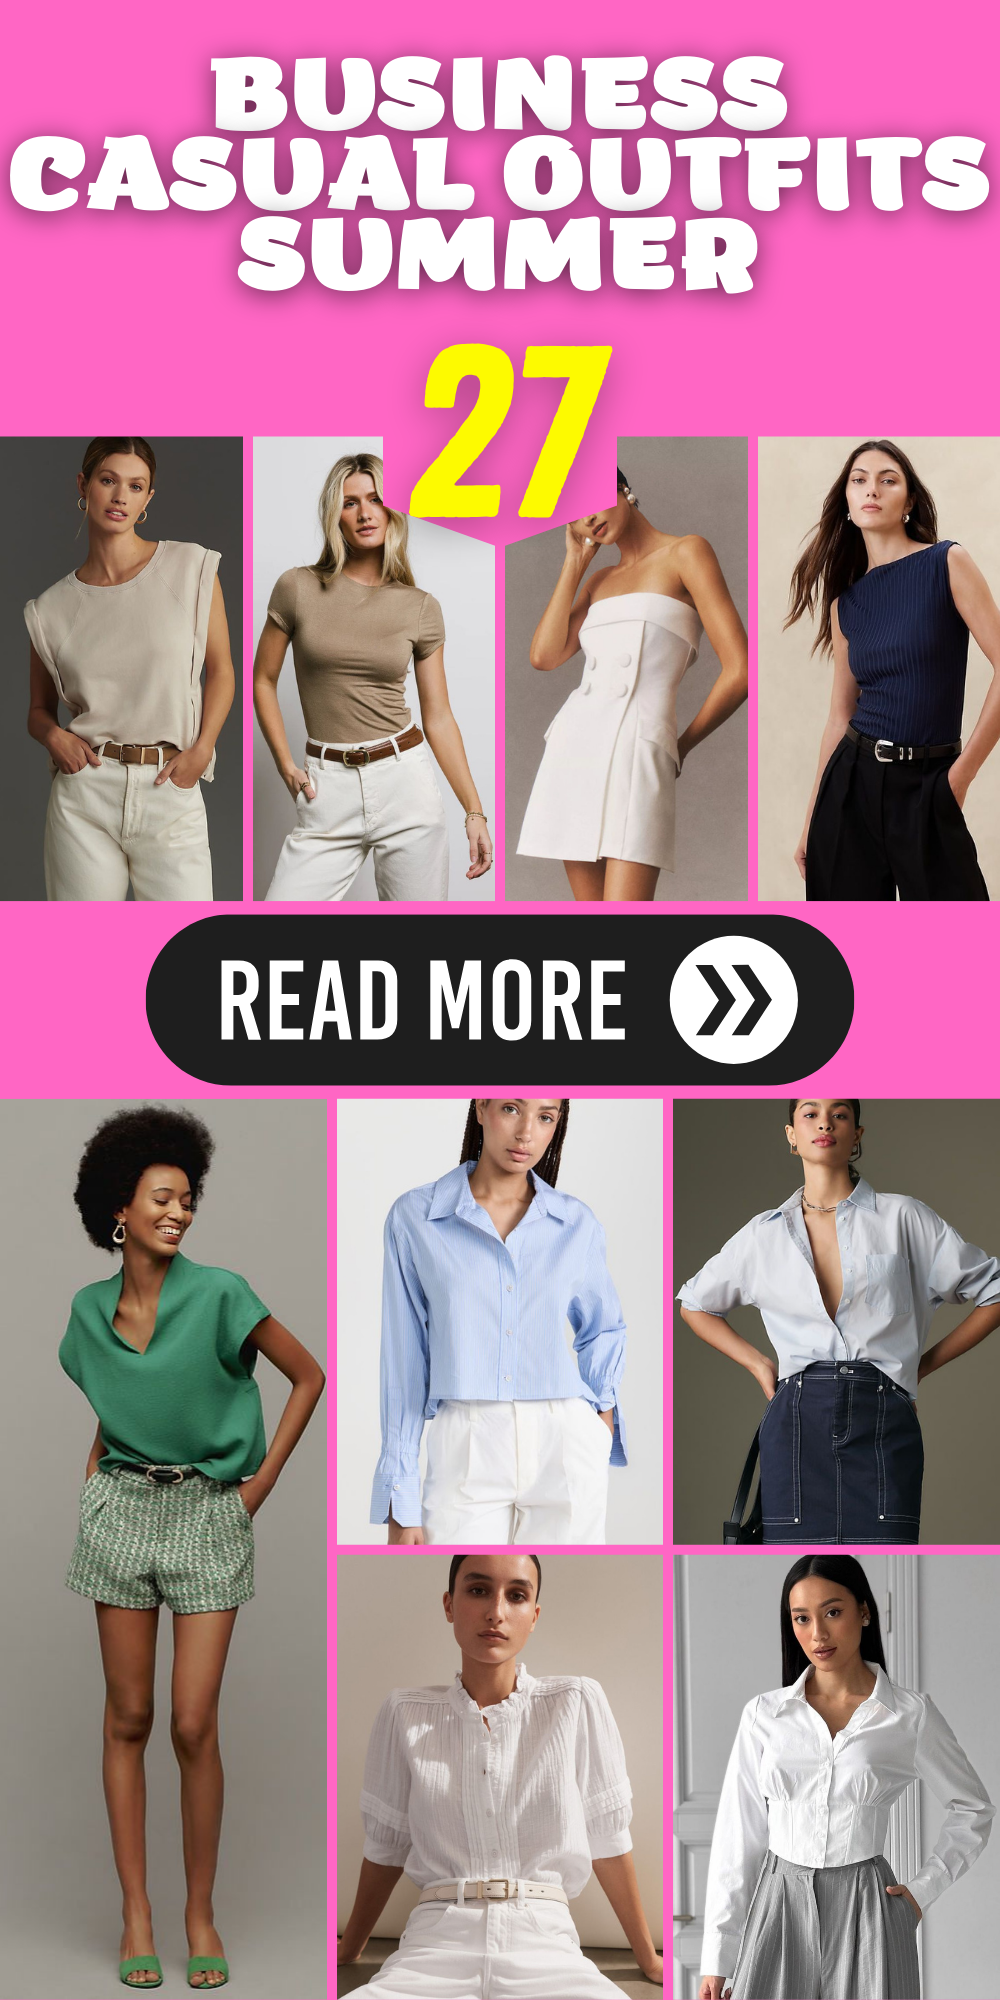 Sizzling Style: Business Casual Outfits for Summer Success